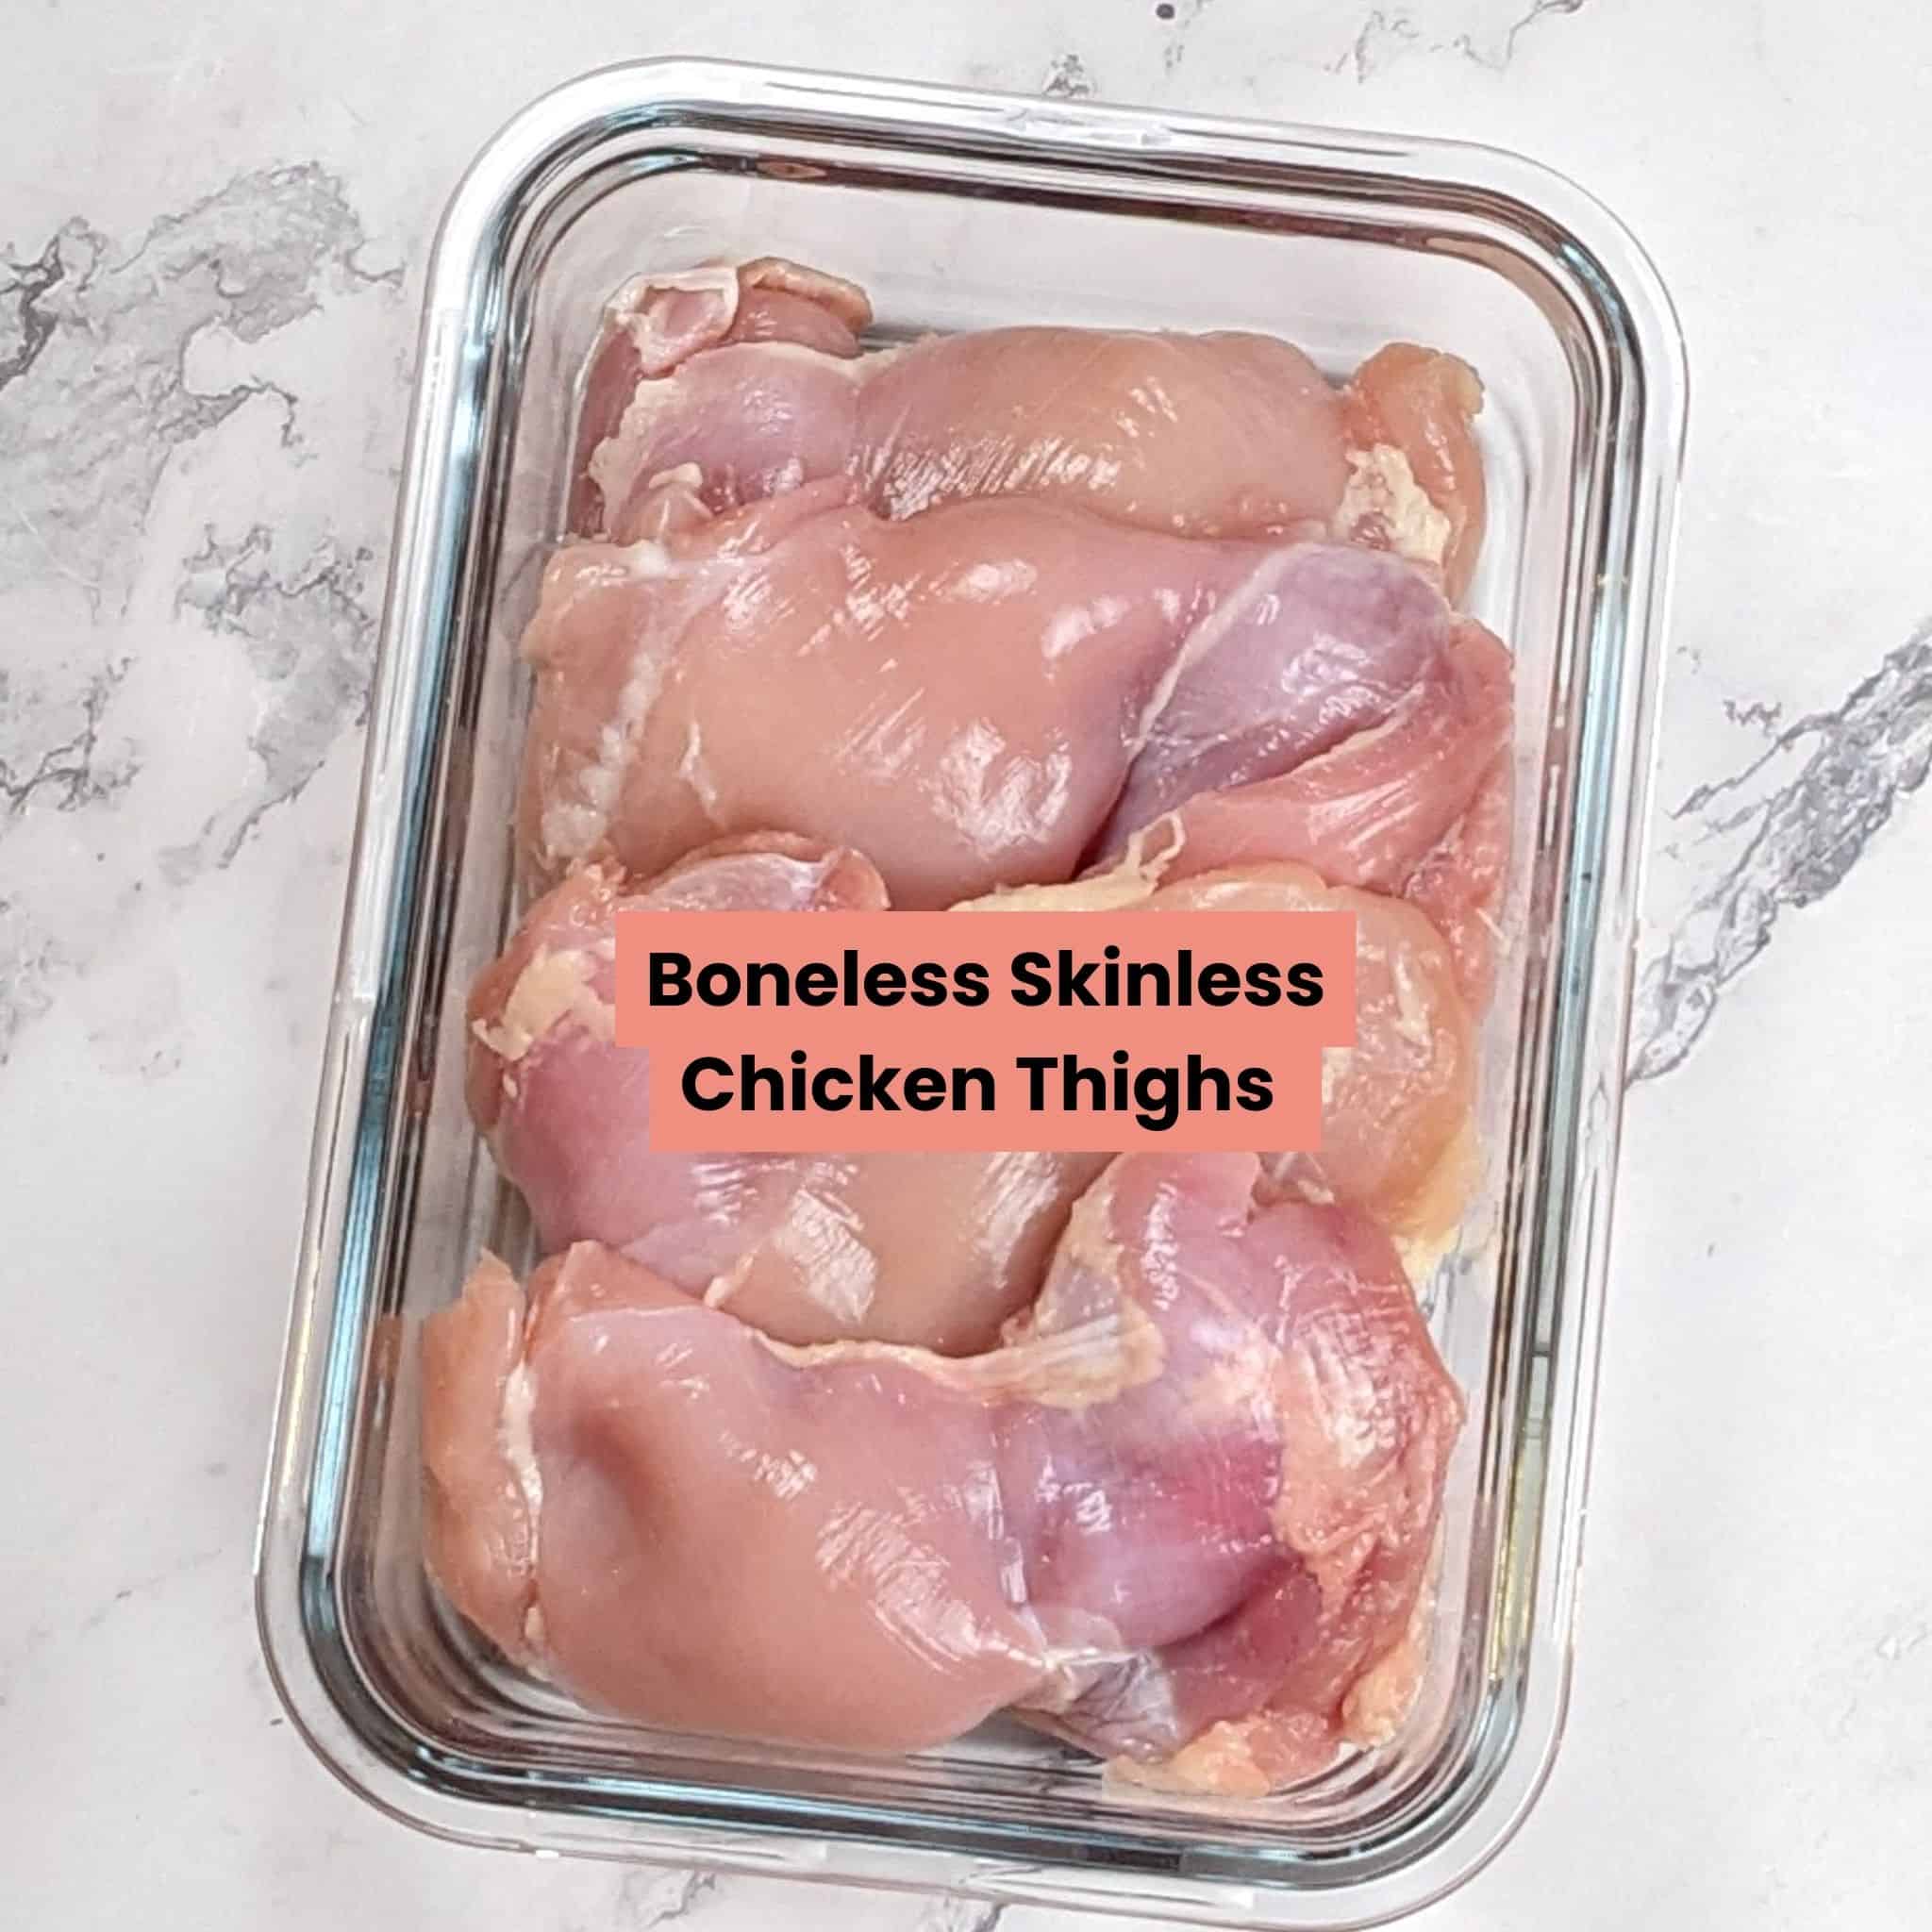 Boneless skinless chicken thighs cascaded in a rectangle glass container for the Calabrian pepper yogurt chicken recipe.